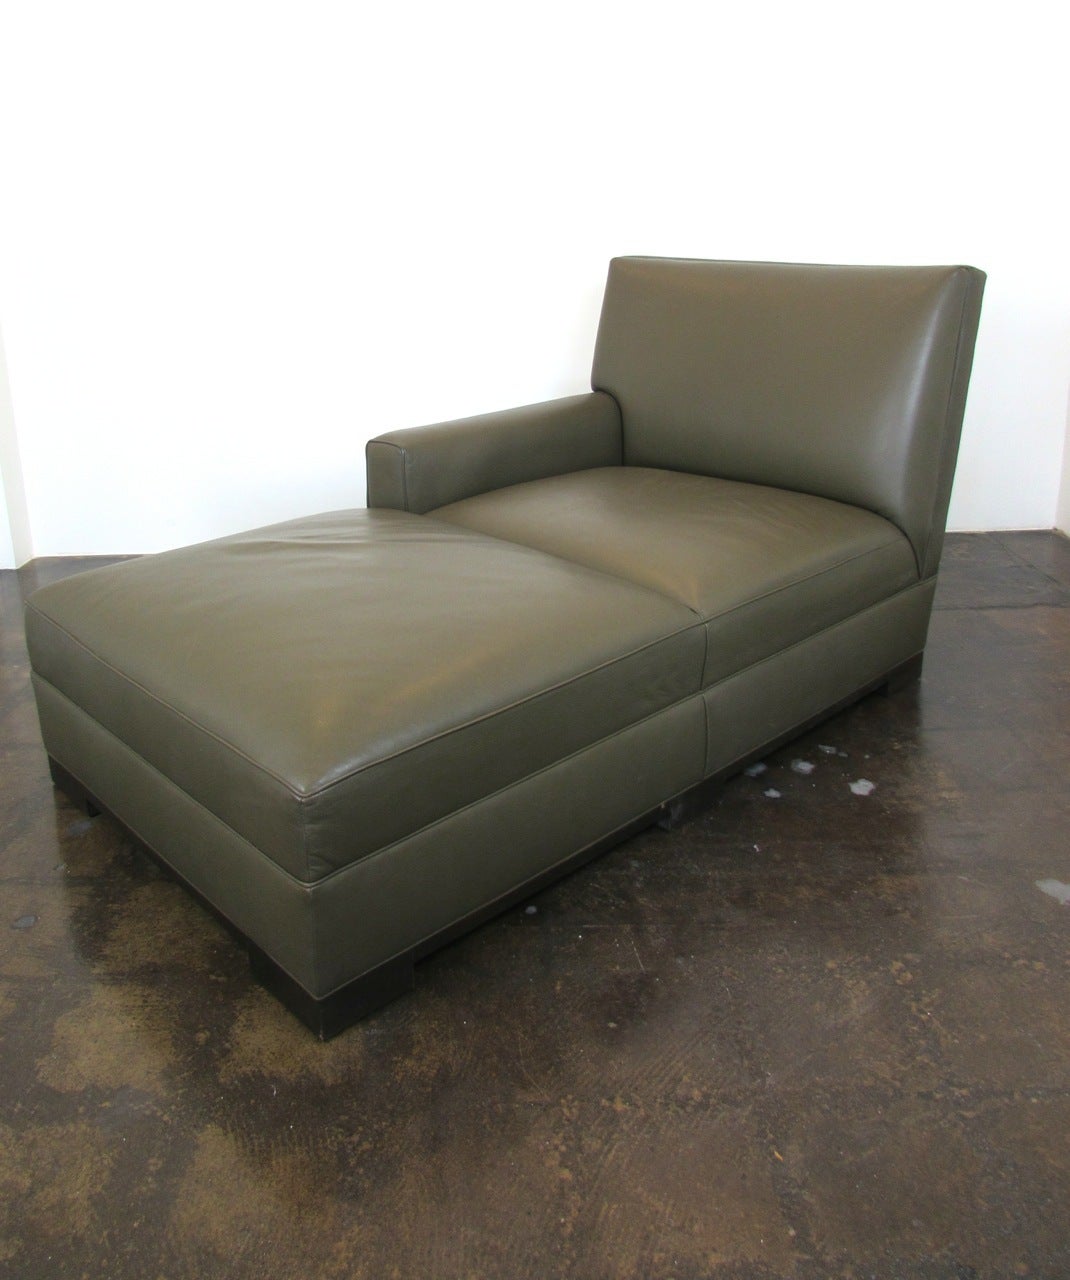 Dark olive green leather Hugo chaise lounge by Terry Hunziker for Sutherland.